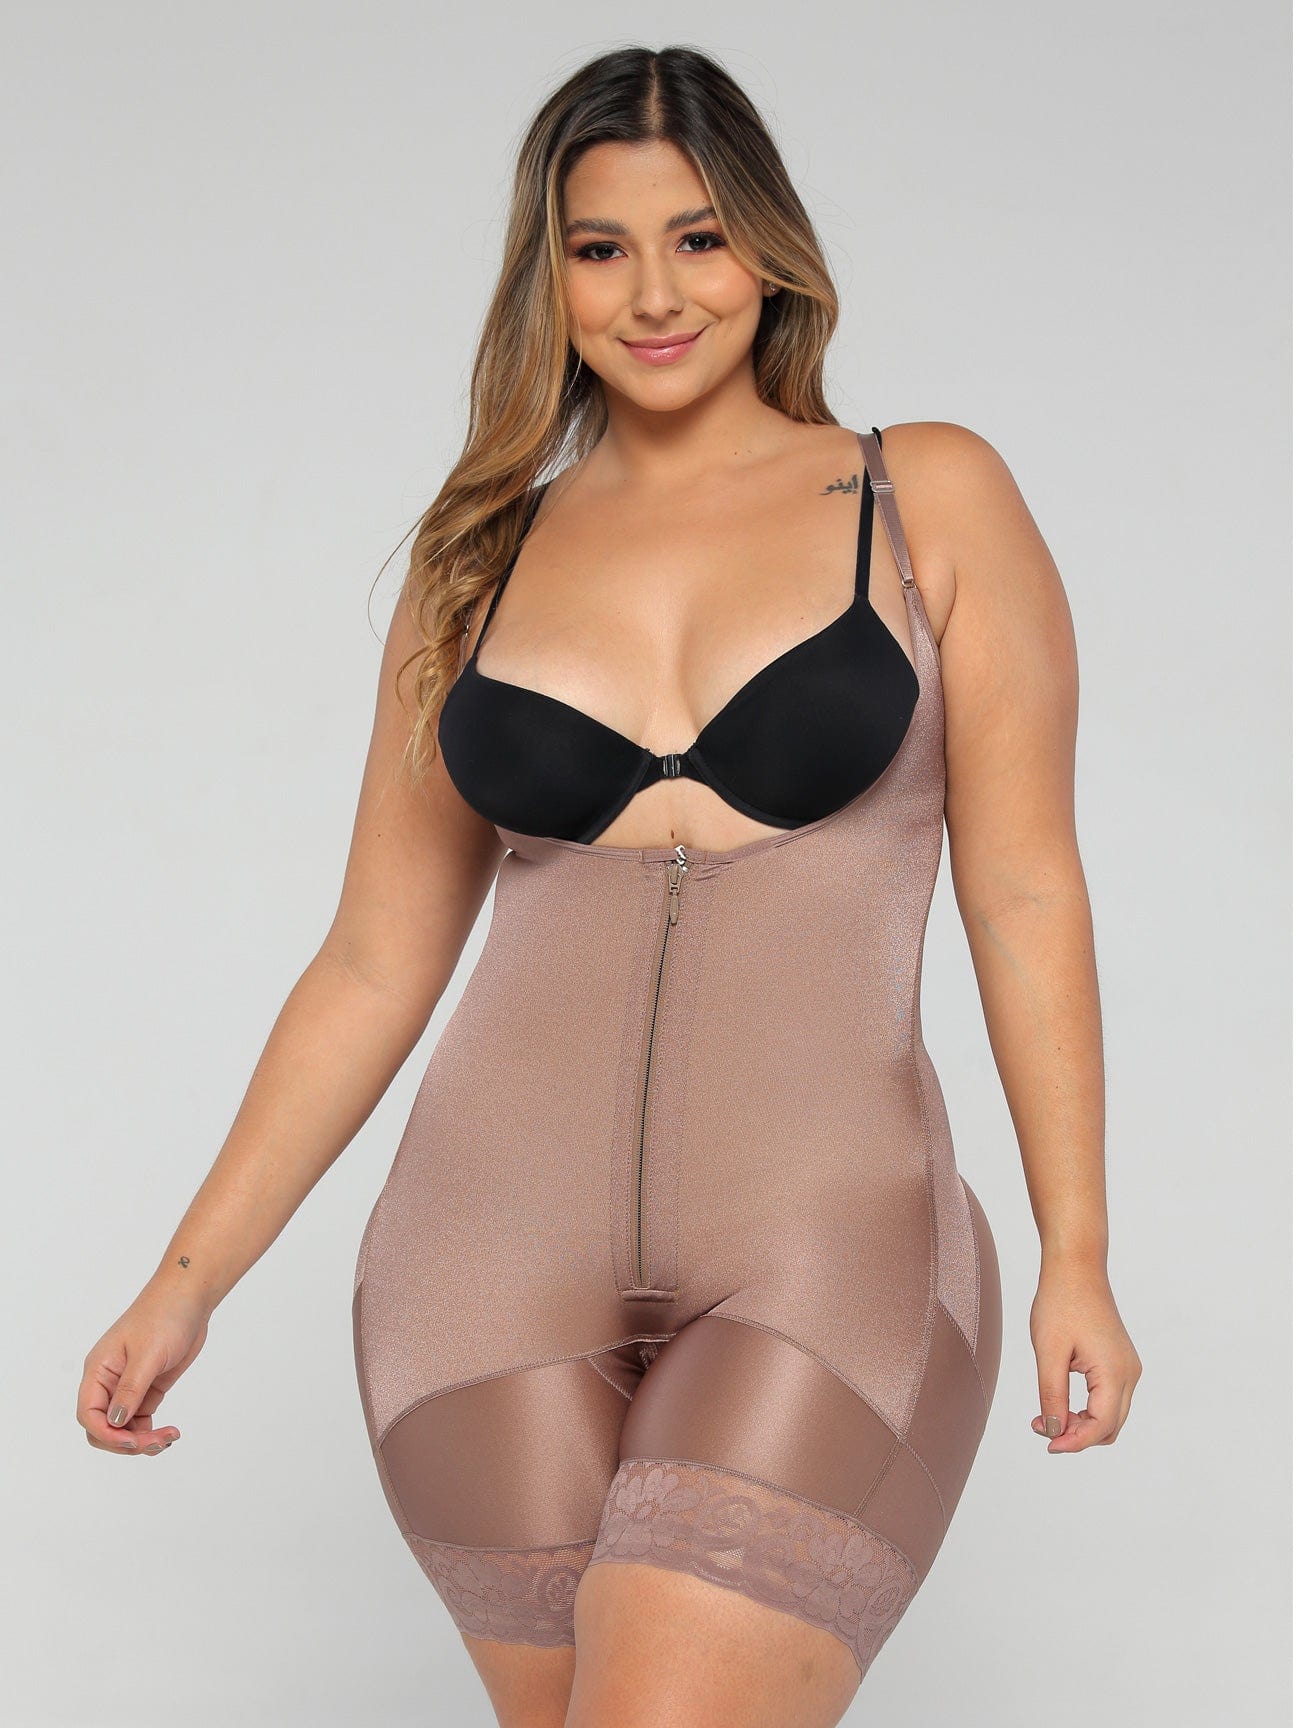 Faja - Cali Curves Fajas - Brand New - Stage 2 for Sale in Placentia